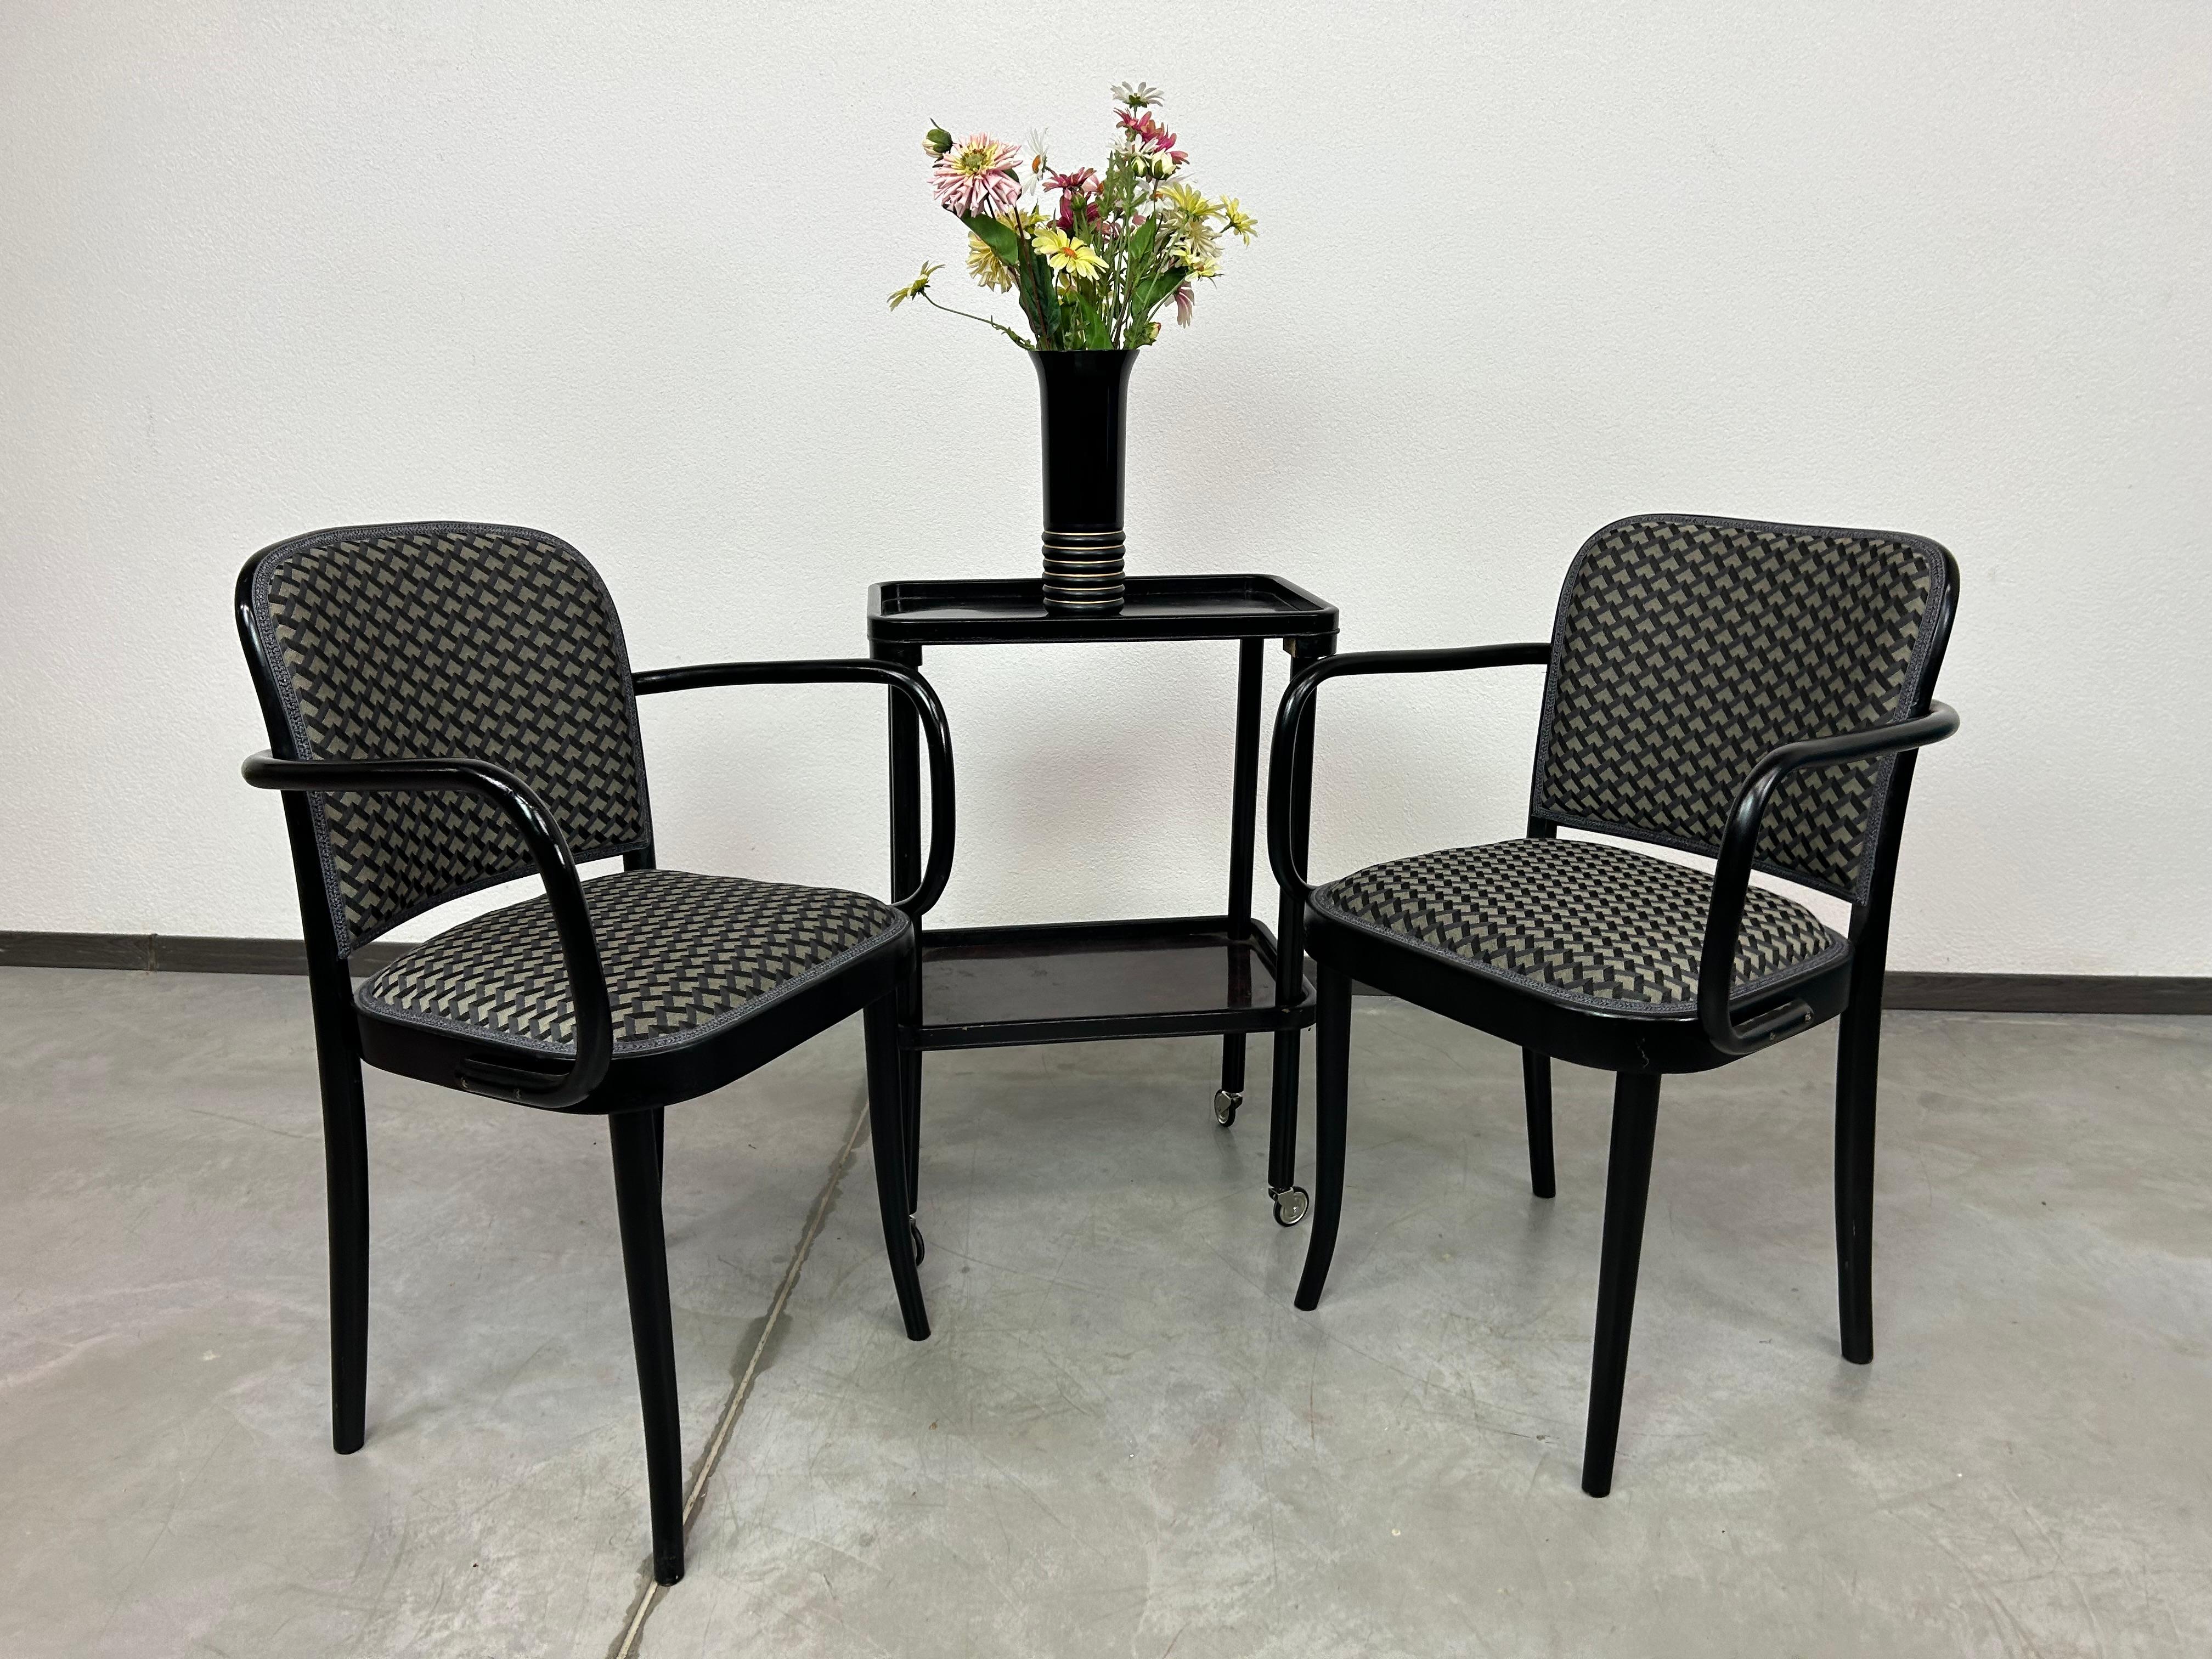 Black art deco armchairs no.811 by Josef Hoffmann for TON,